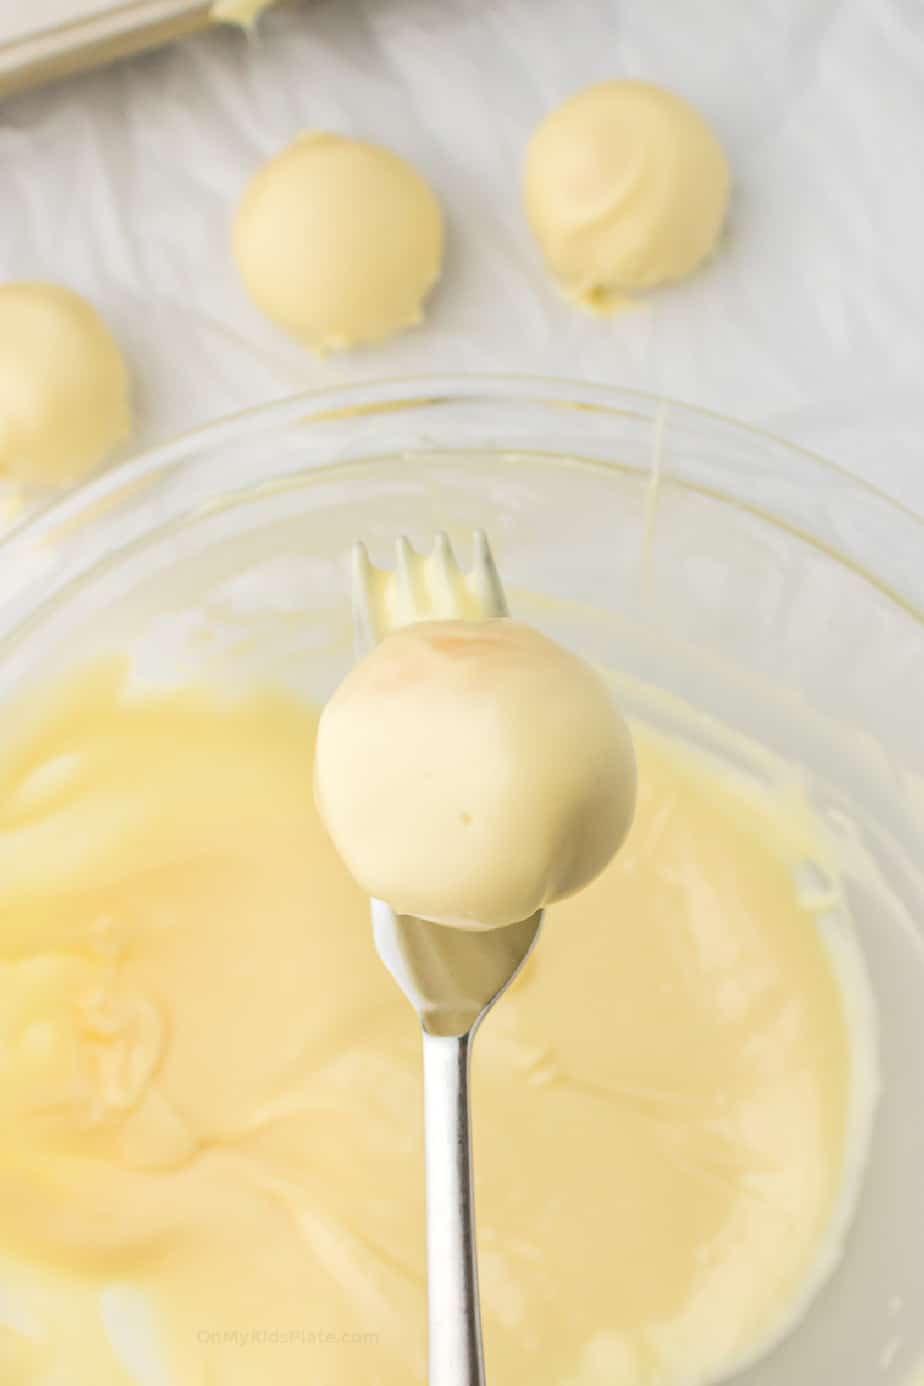 Lemon truffle being dipped in a bowl of white chocolate using a fork